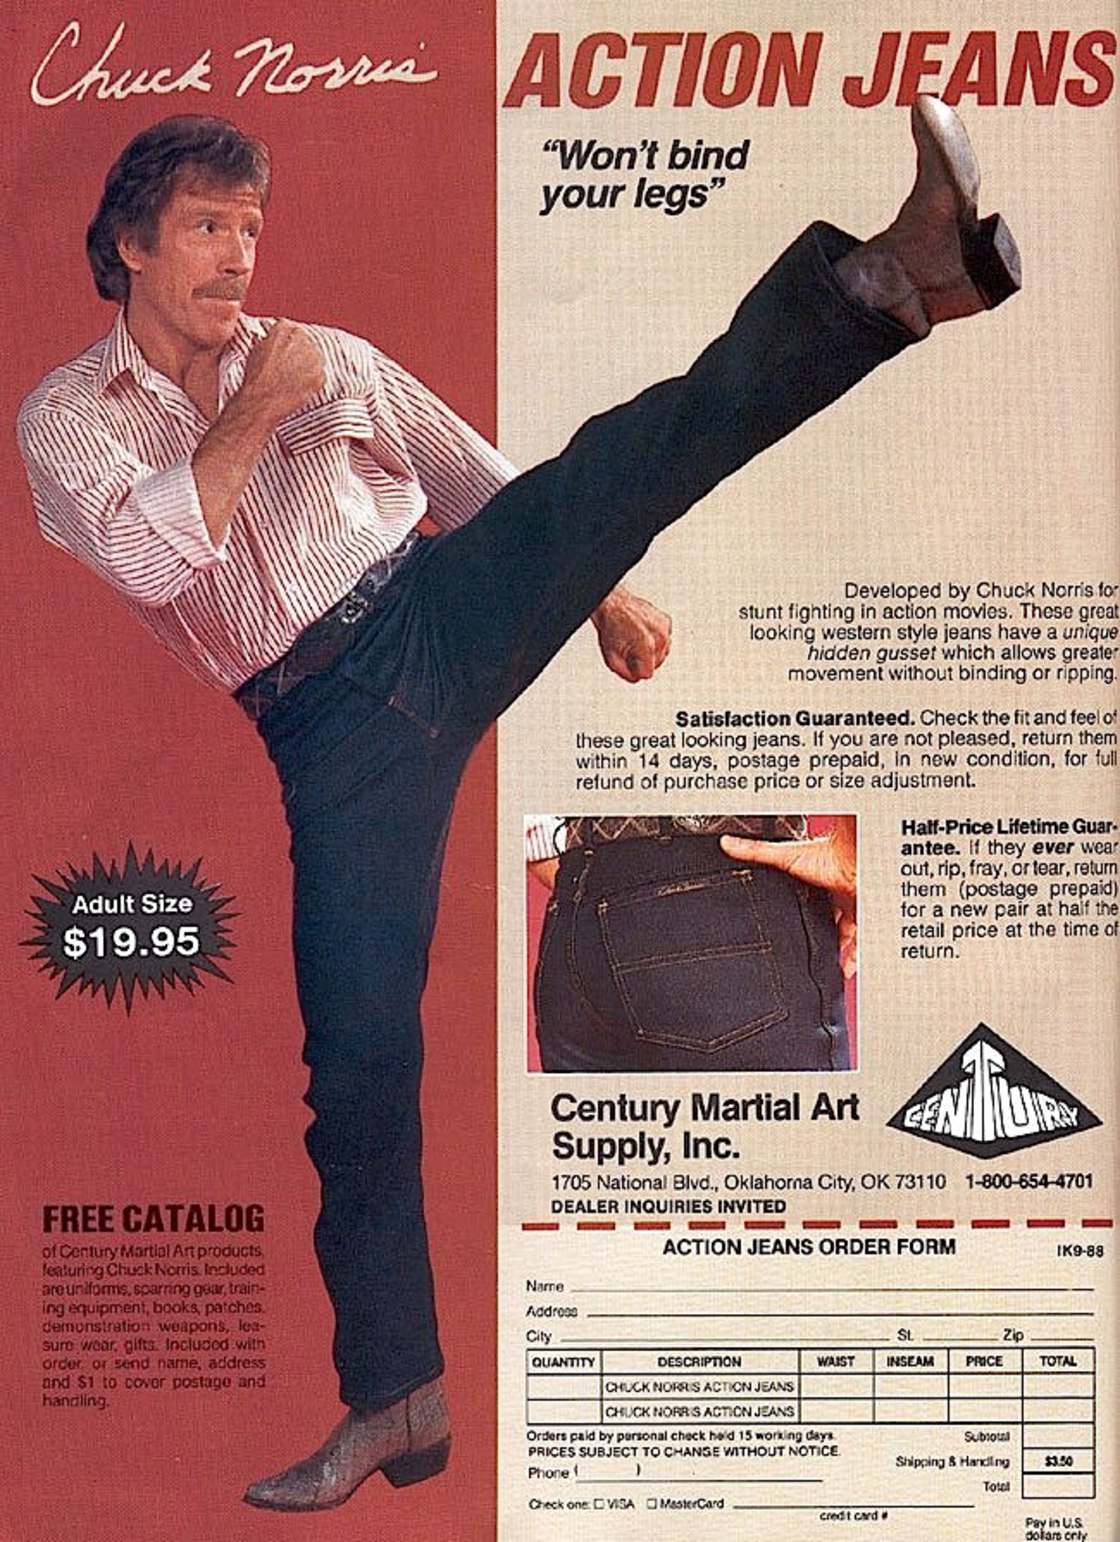 Awesome vintage advertisement for action jeans of Chuck Norris showing off his high kick.